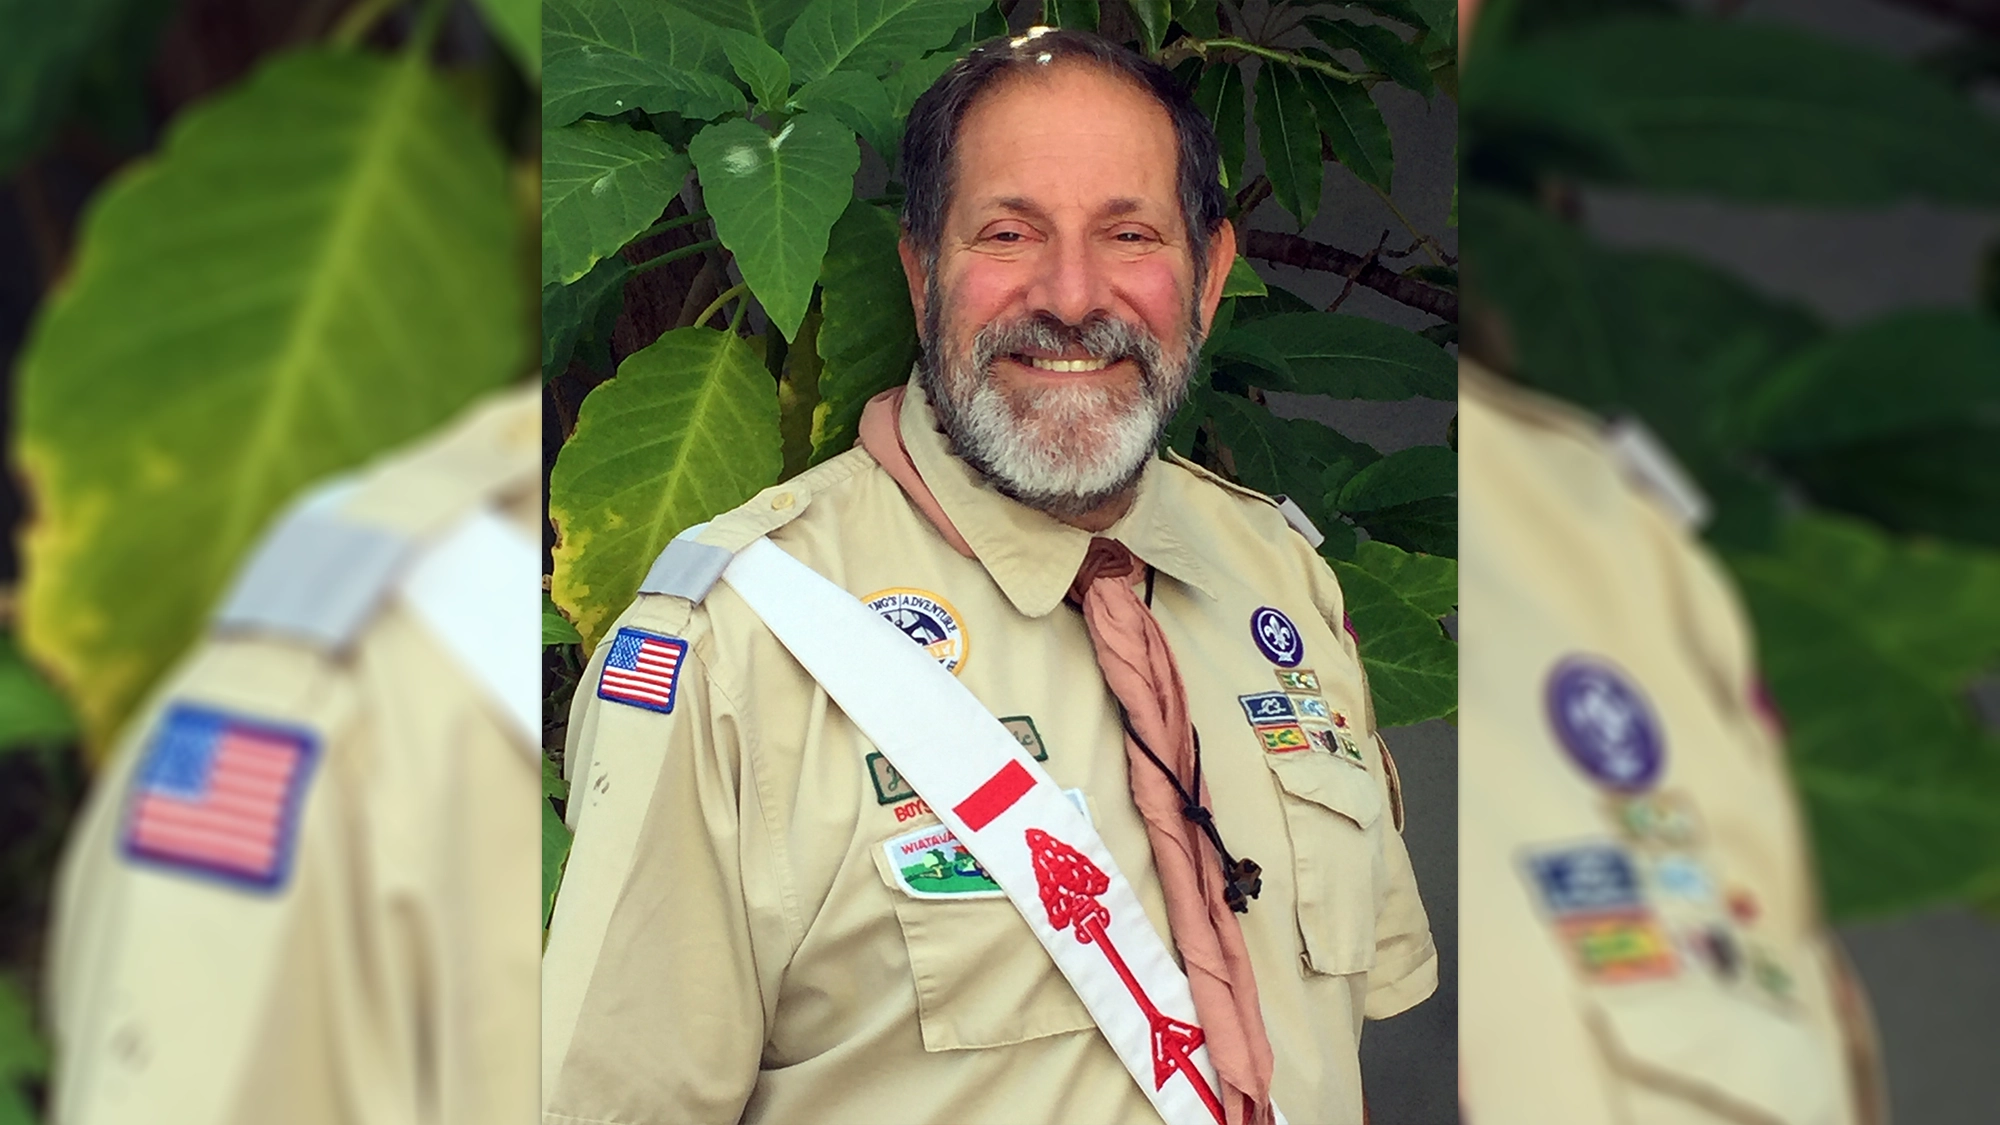 From Eagle Scout to Diving Luminary Dr. Bozanic Honored with NOGI